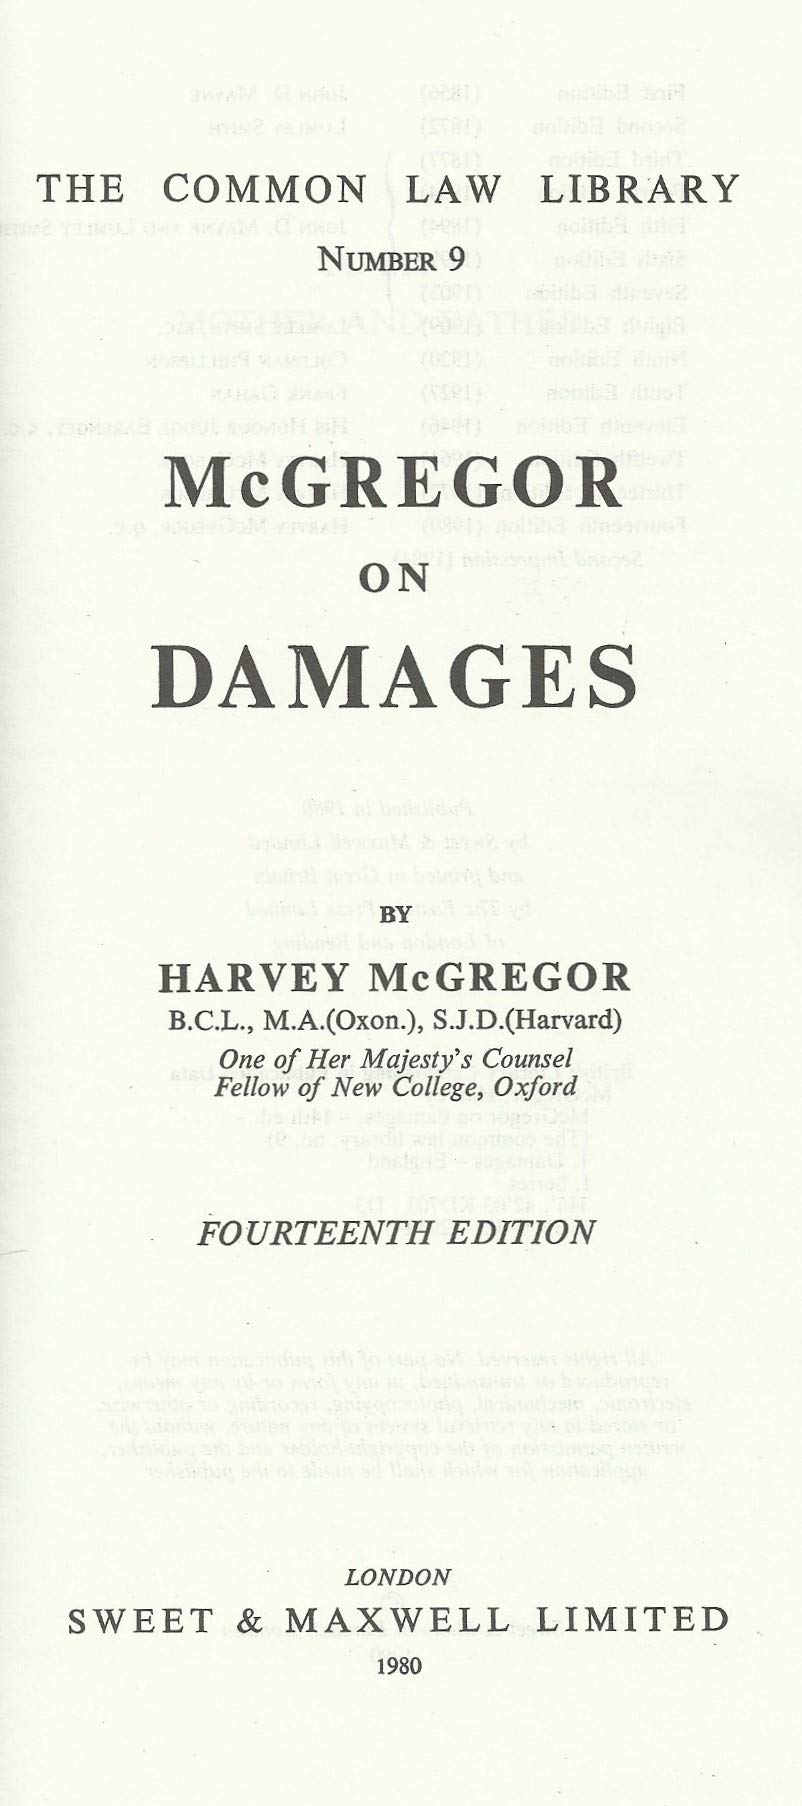 McGregor on damages (The common law library)